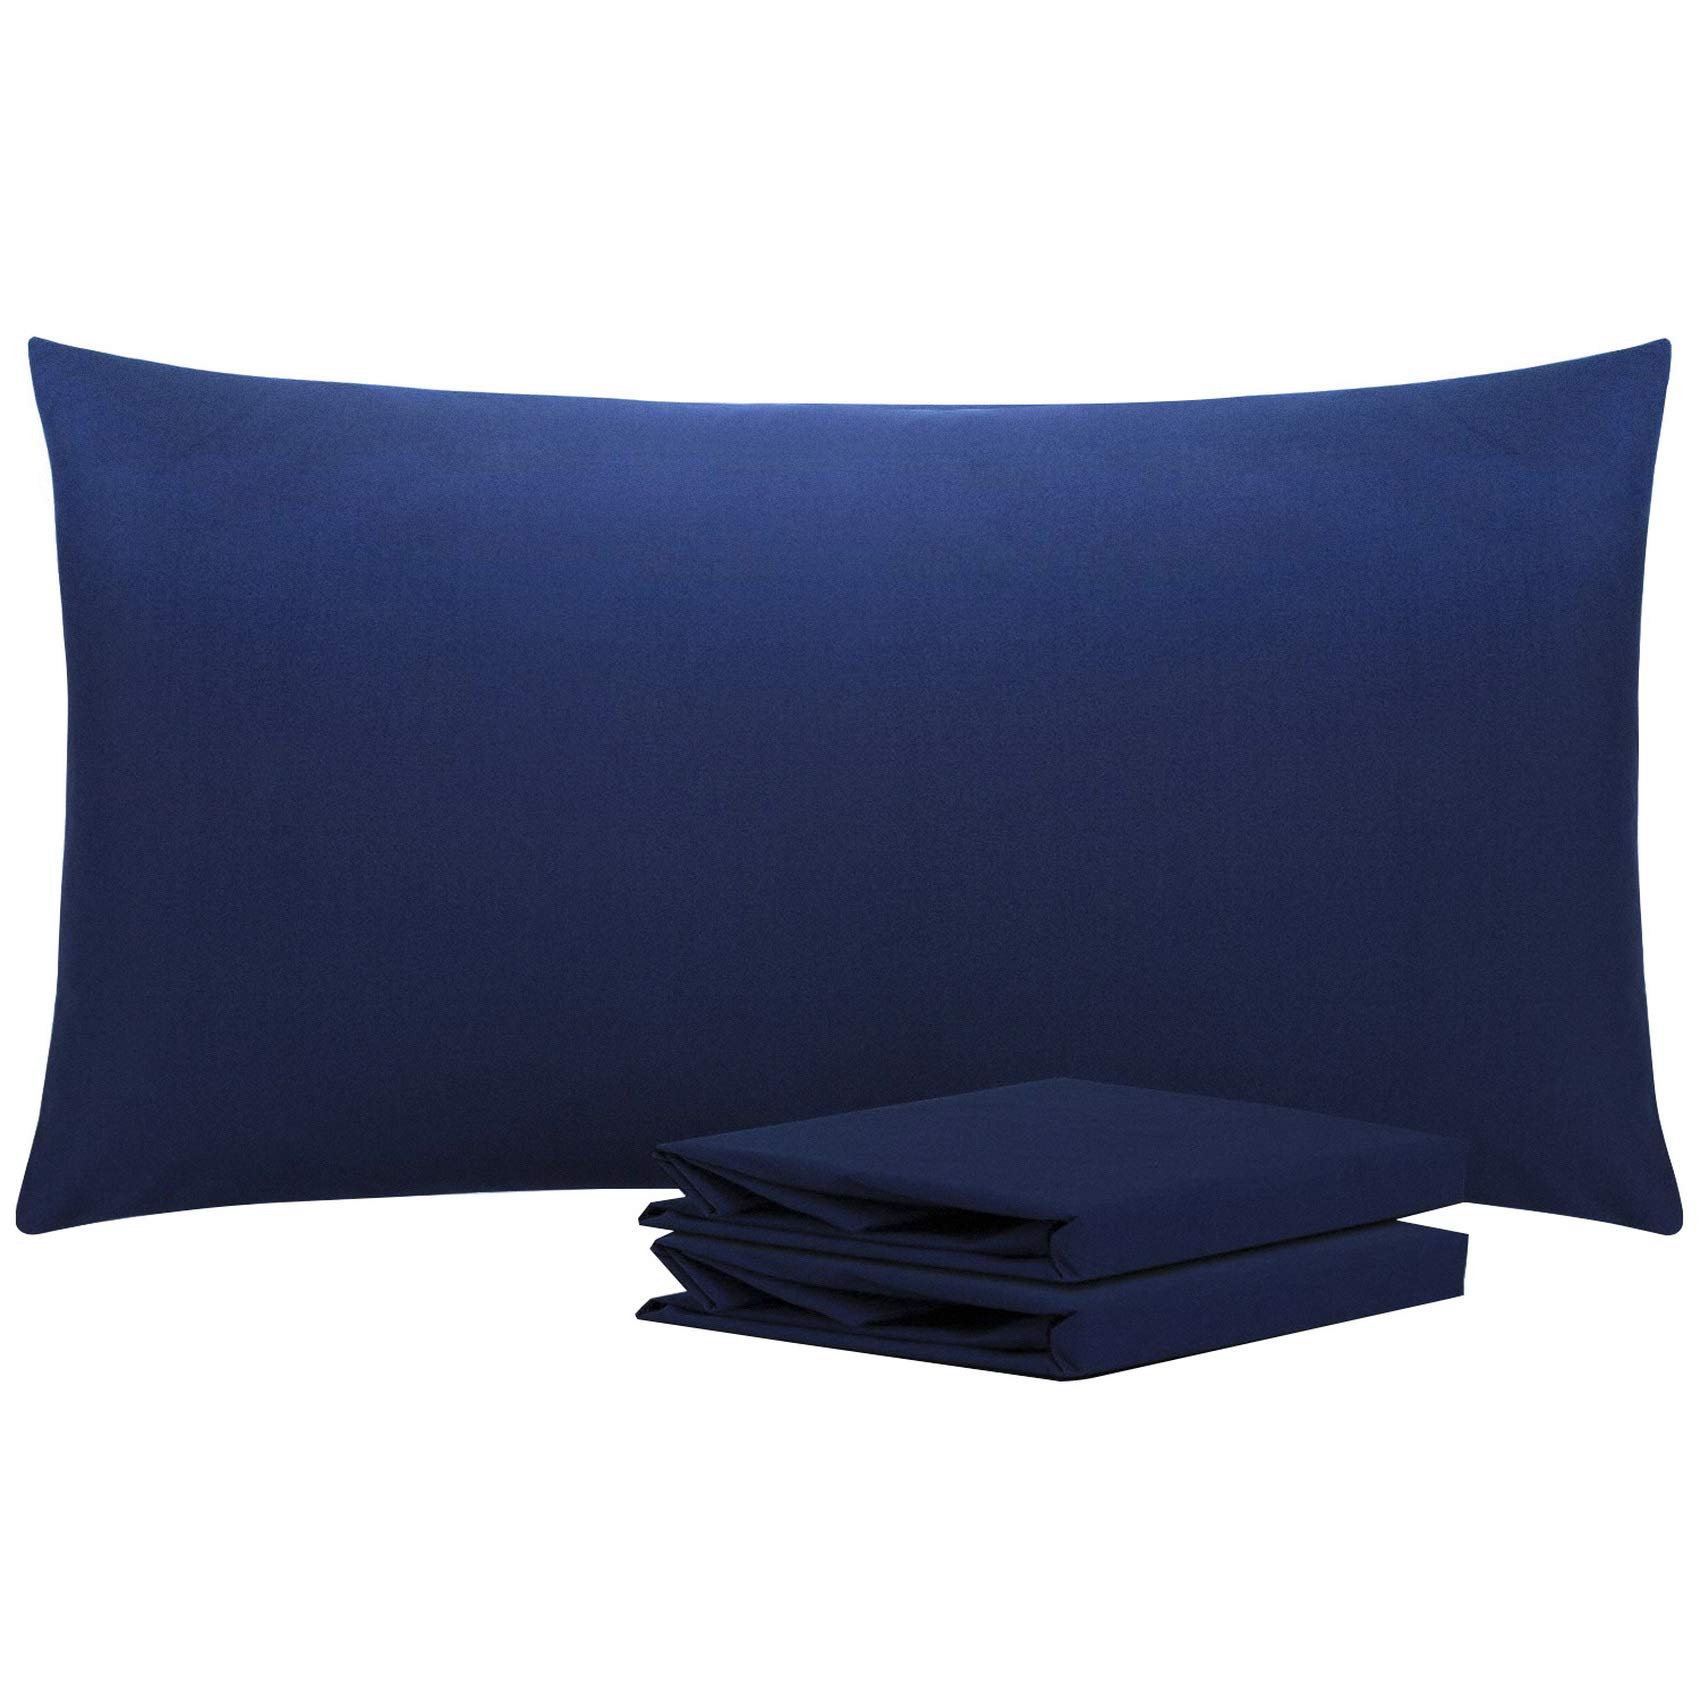 Book Cover NTBAY 100% Brushed Microfiber King Pillowcases Set of 2, Super Soft and Cozy, Wrinkle, Fade, Stain Resistant with Envelope Closure Pillow Cases, 20x36 Inches, Navy Navy Blue King (20